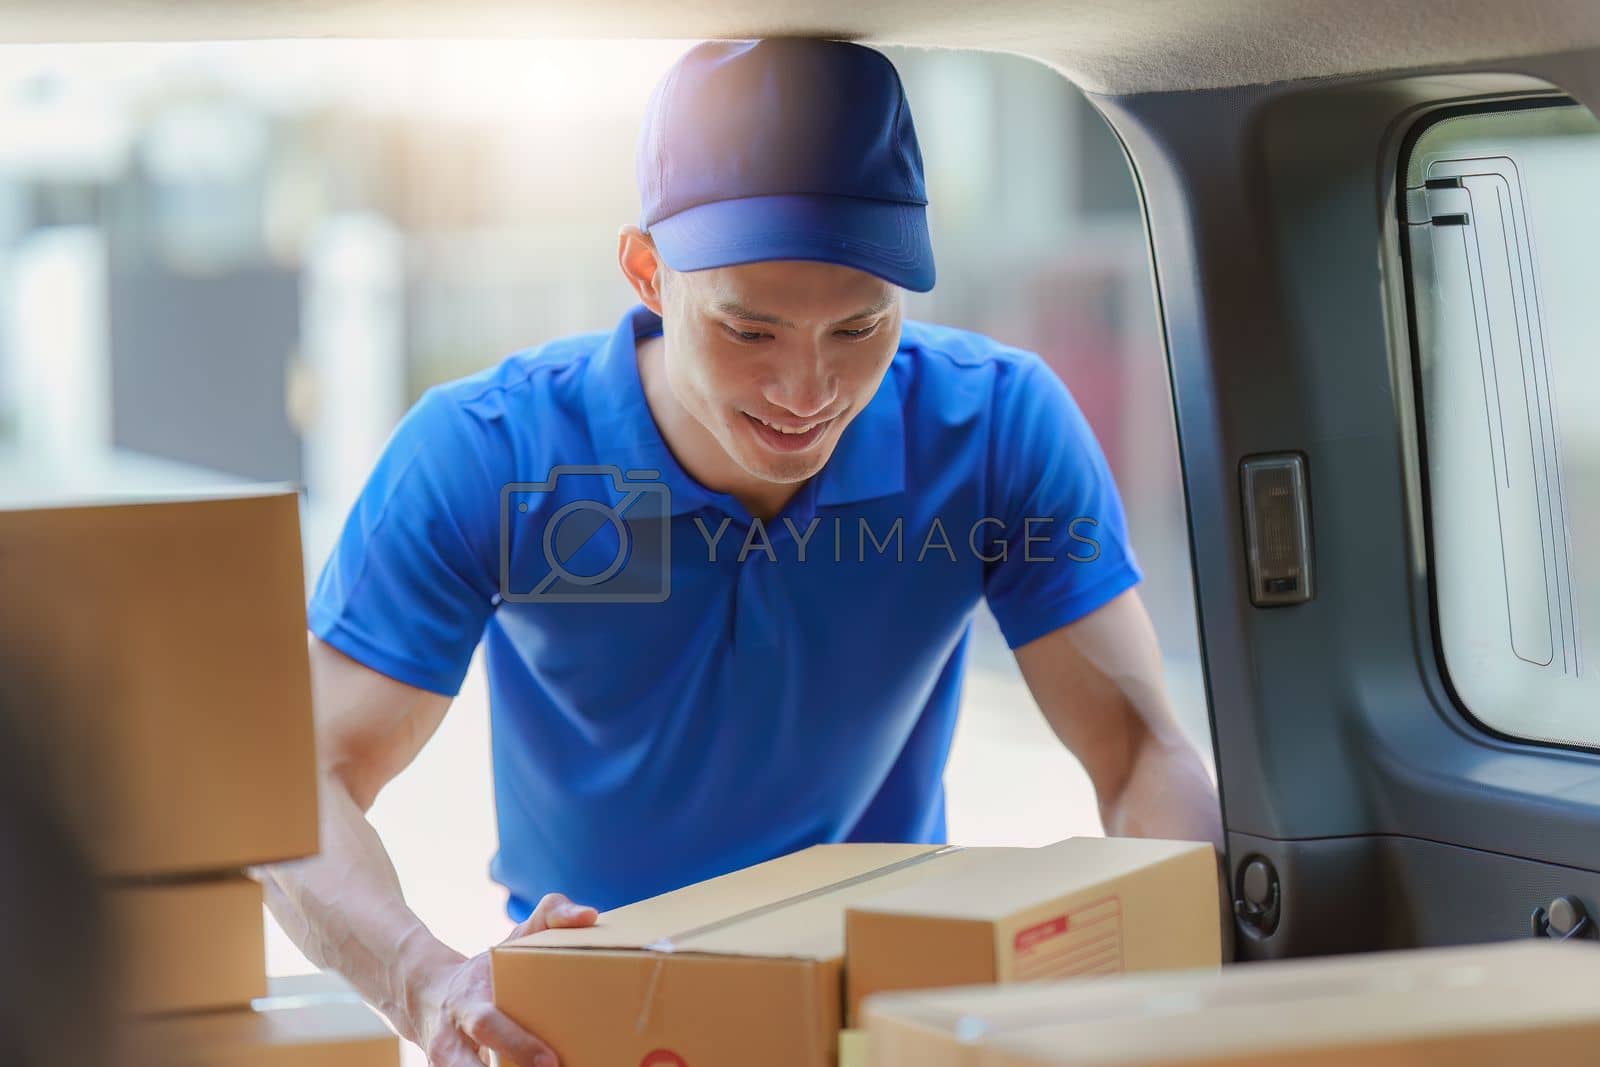 Royalty free image of Asian courier with parcel and delivery logistic concept. Delivery man holding parcel box by itchaznong